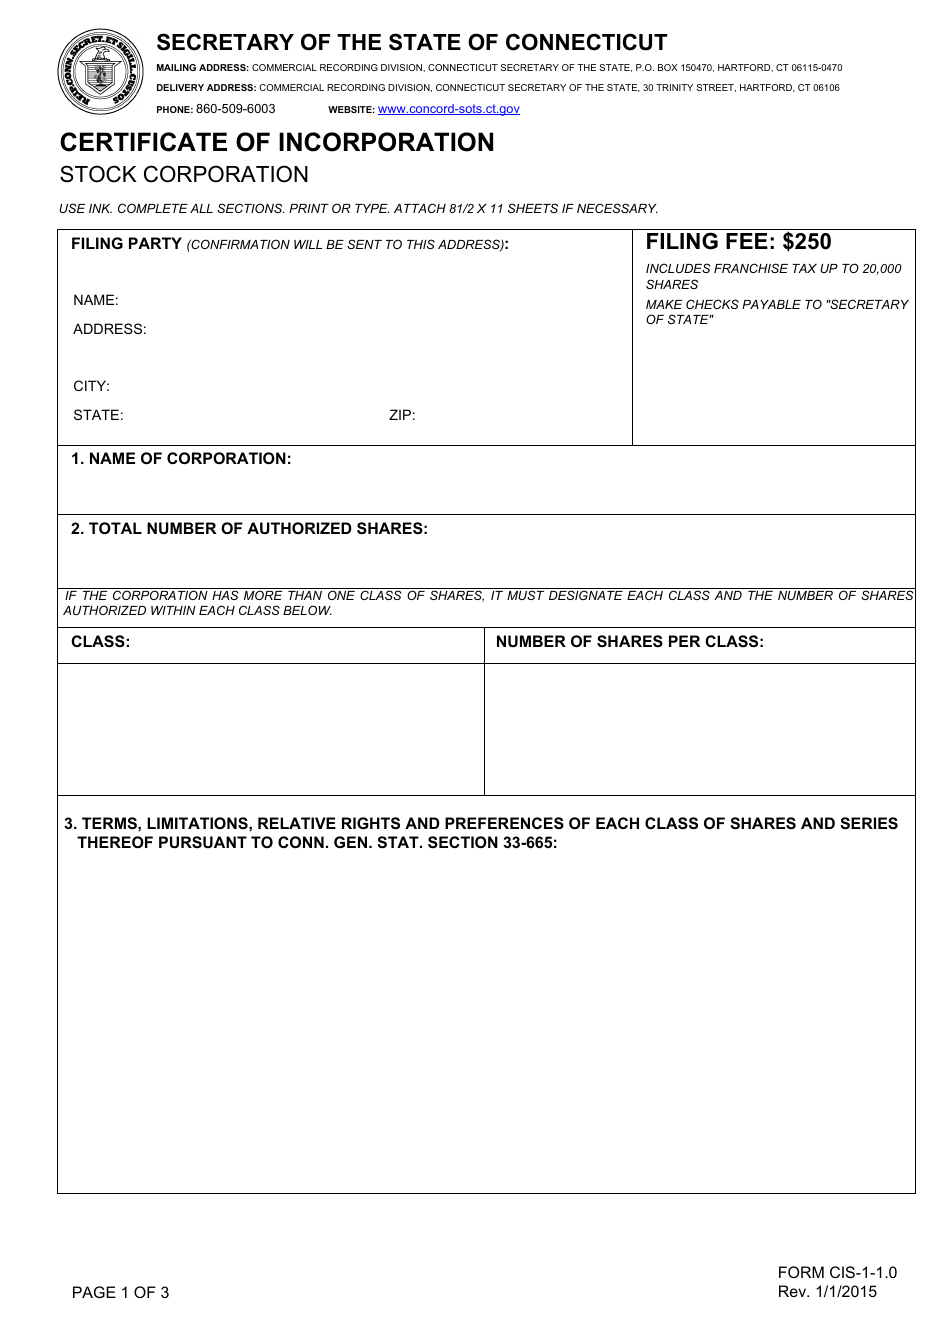 Form CIS-1-1.0 Certificate of Incorporation - Stock Corporation - Connecticut, Page 1